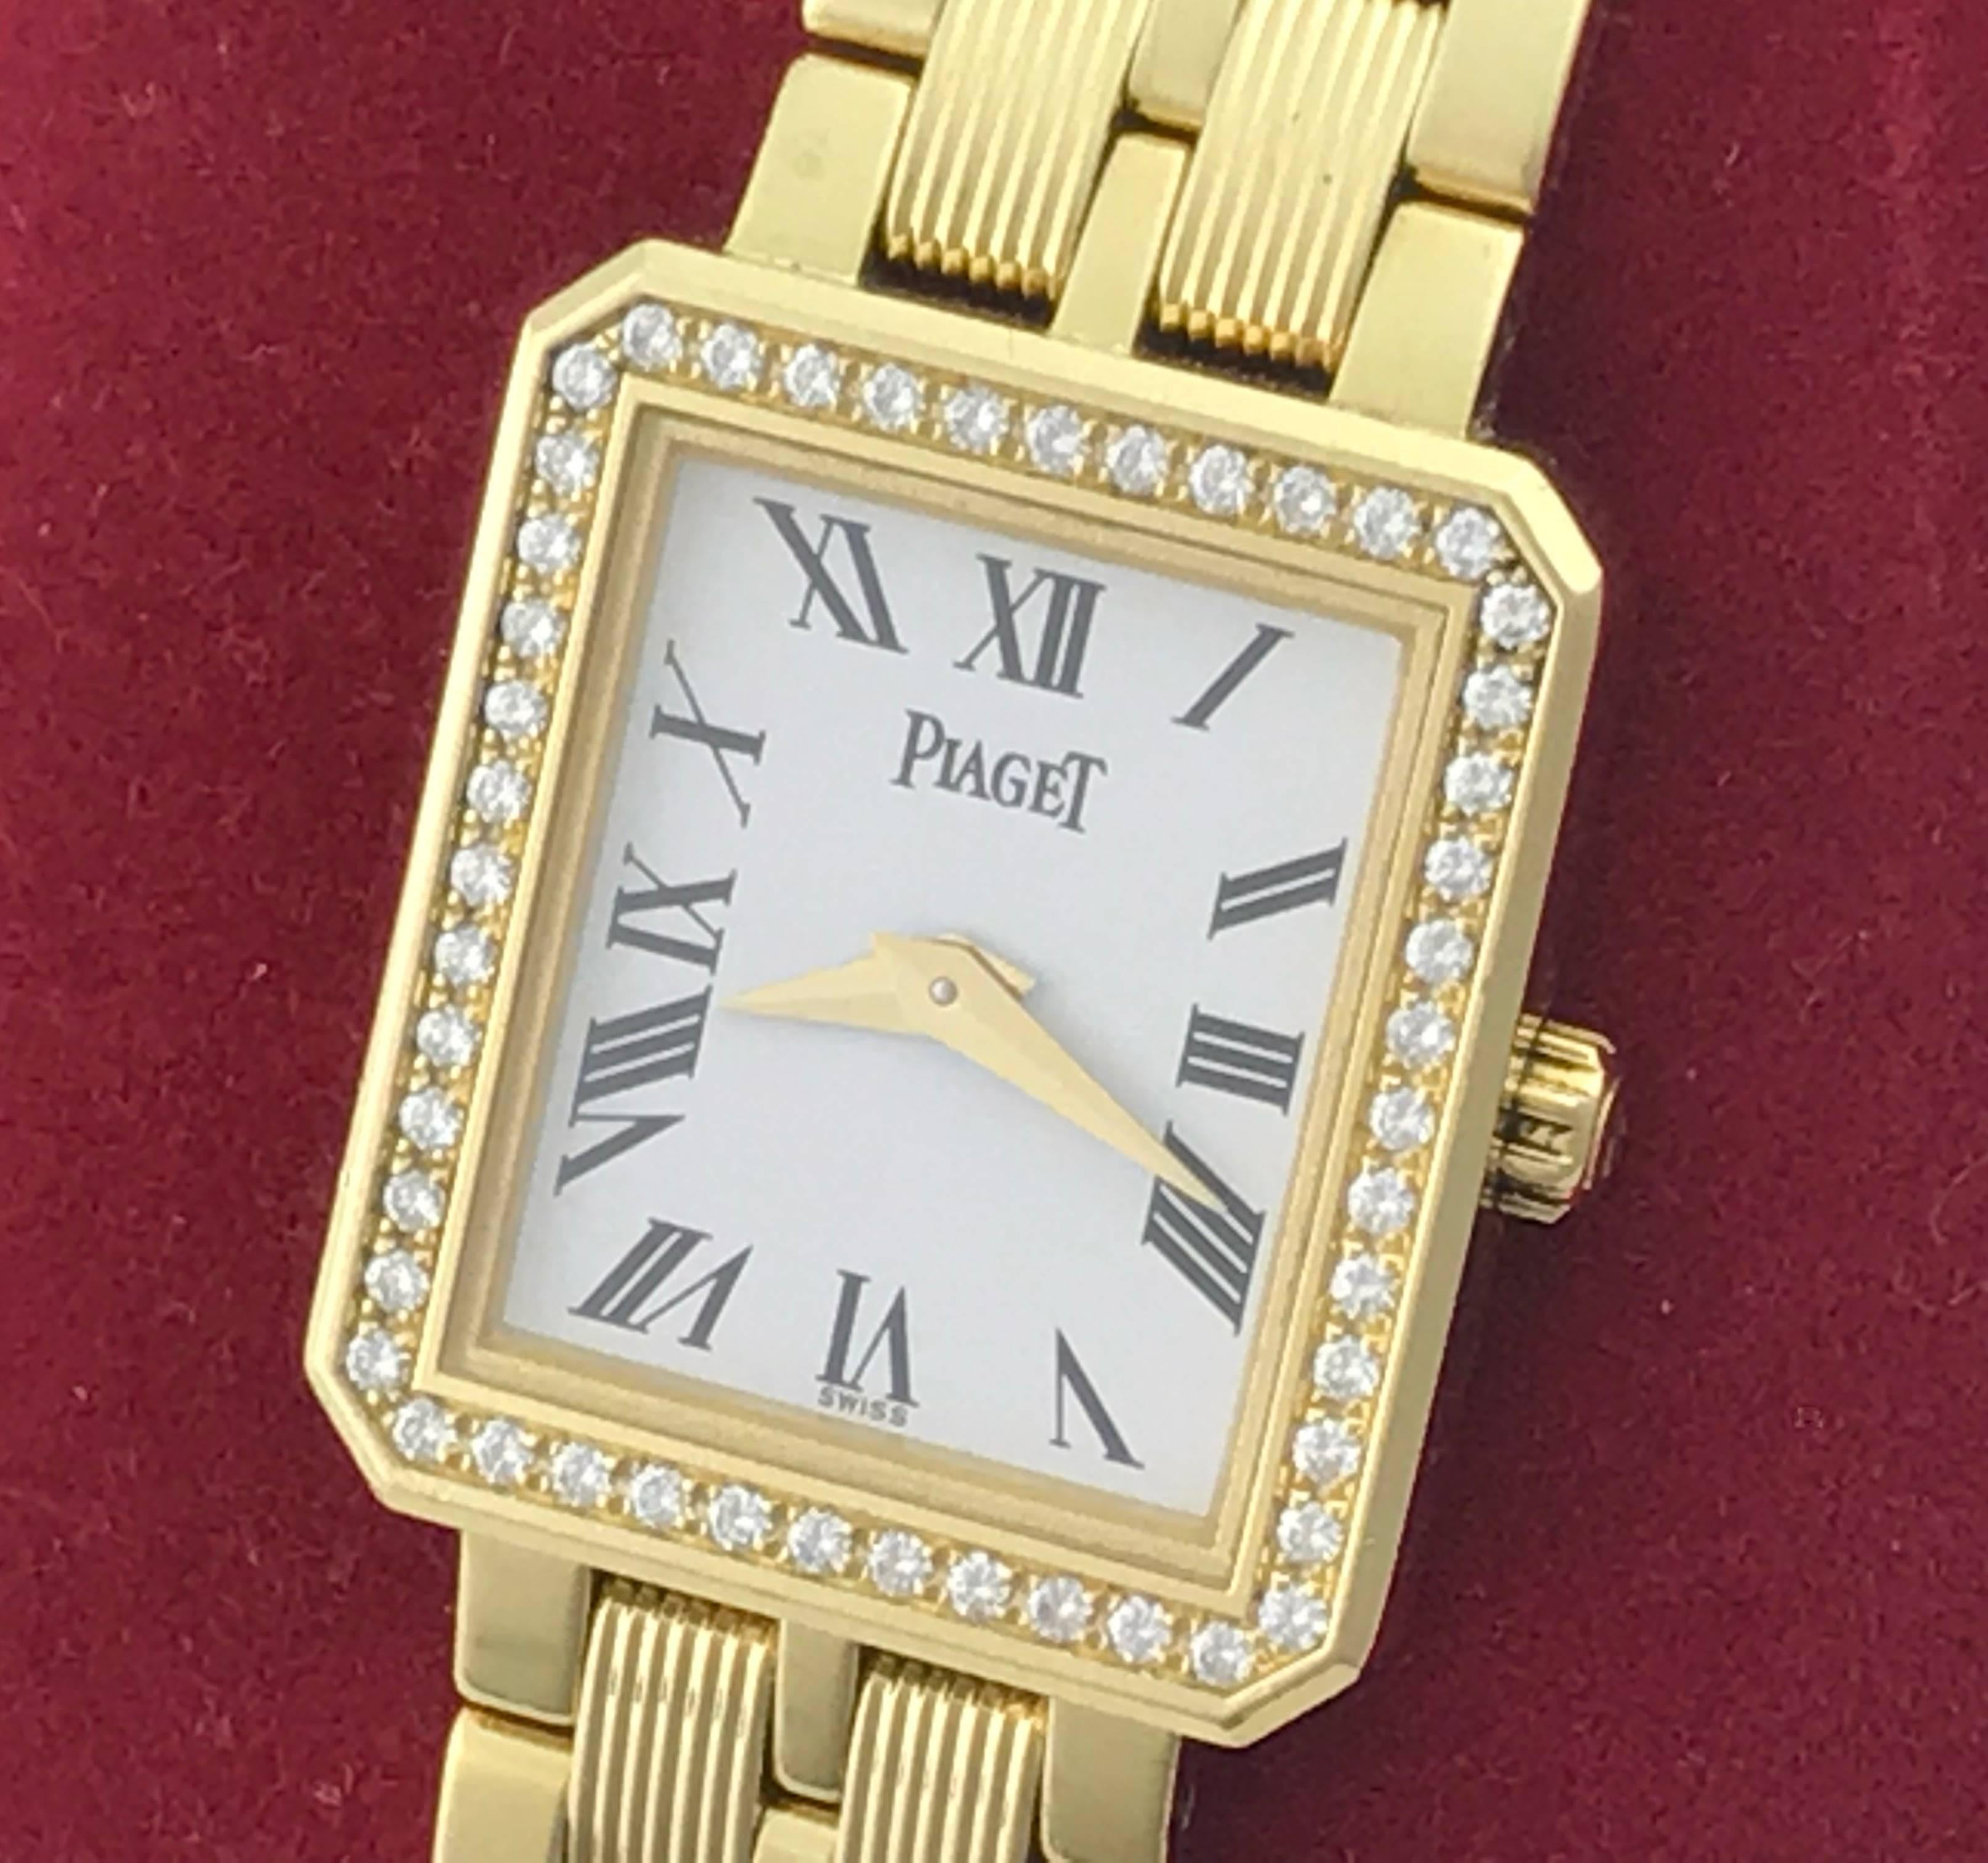 Piaget ladies 18k yellow gold and diamond quartz wrist watch. Model 5355M601D. 18k Yellow Gold rectangular style case with Piaget Diamond bezel (19x22mm), 18k Yellow Gold Piaget bracelet with deployant clasp, Gold Dial. Certified Pre Owned and ready